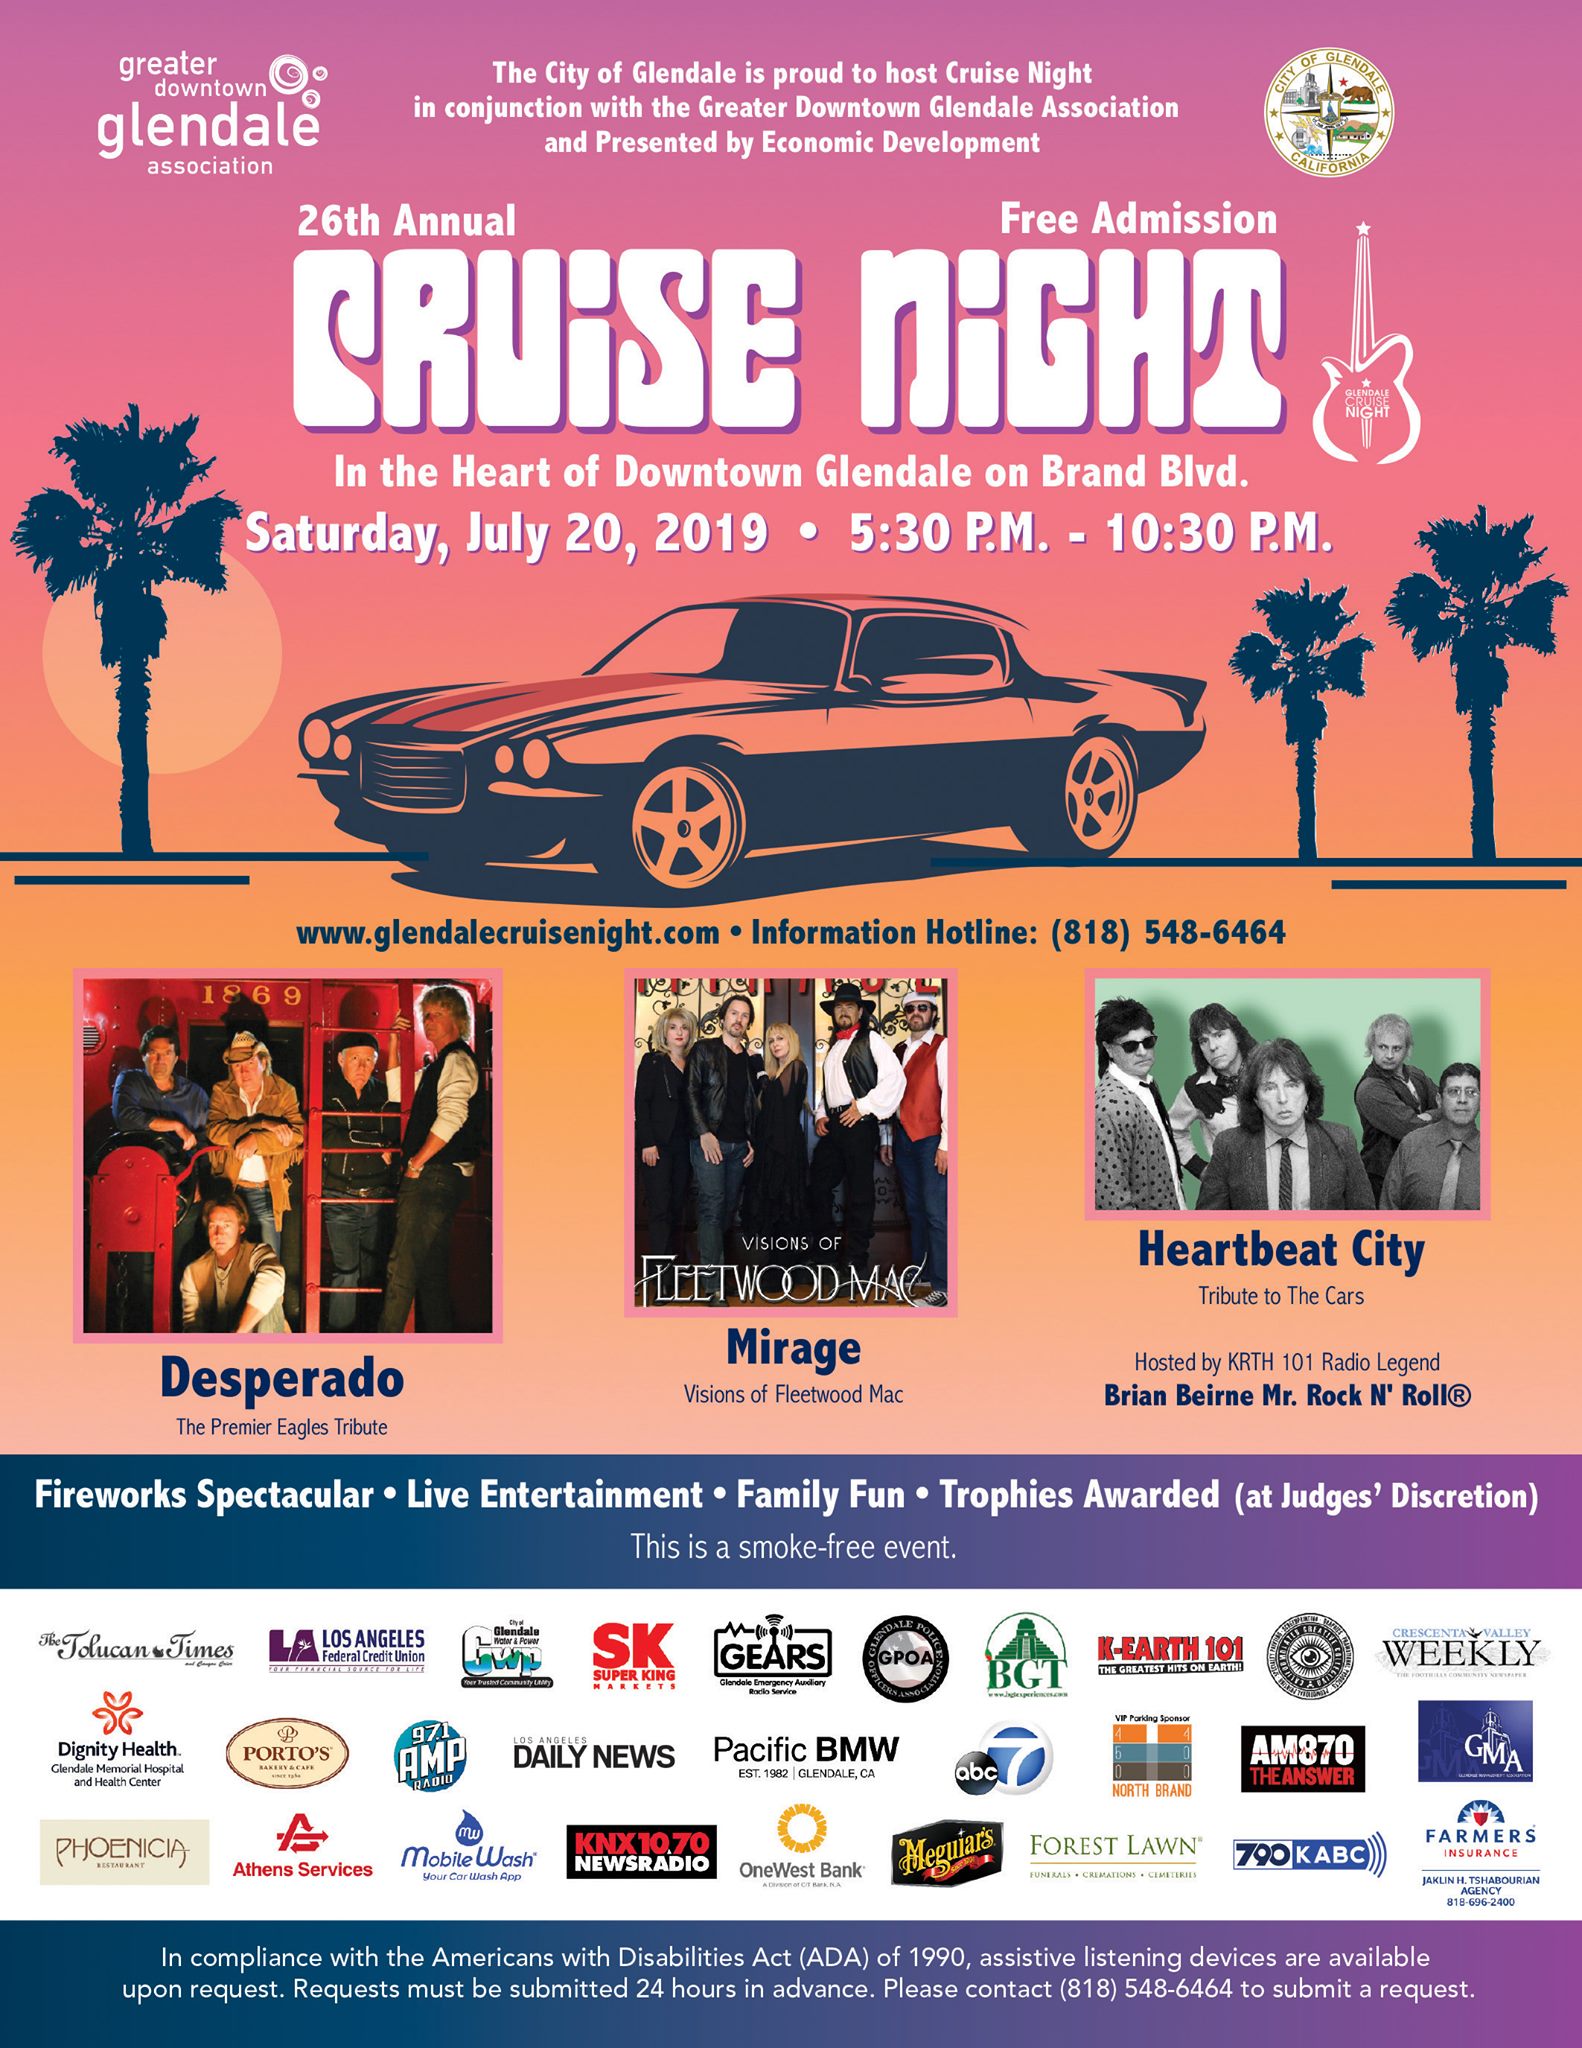 26th Annual Glendale Cruise NIght Rides Collective